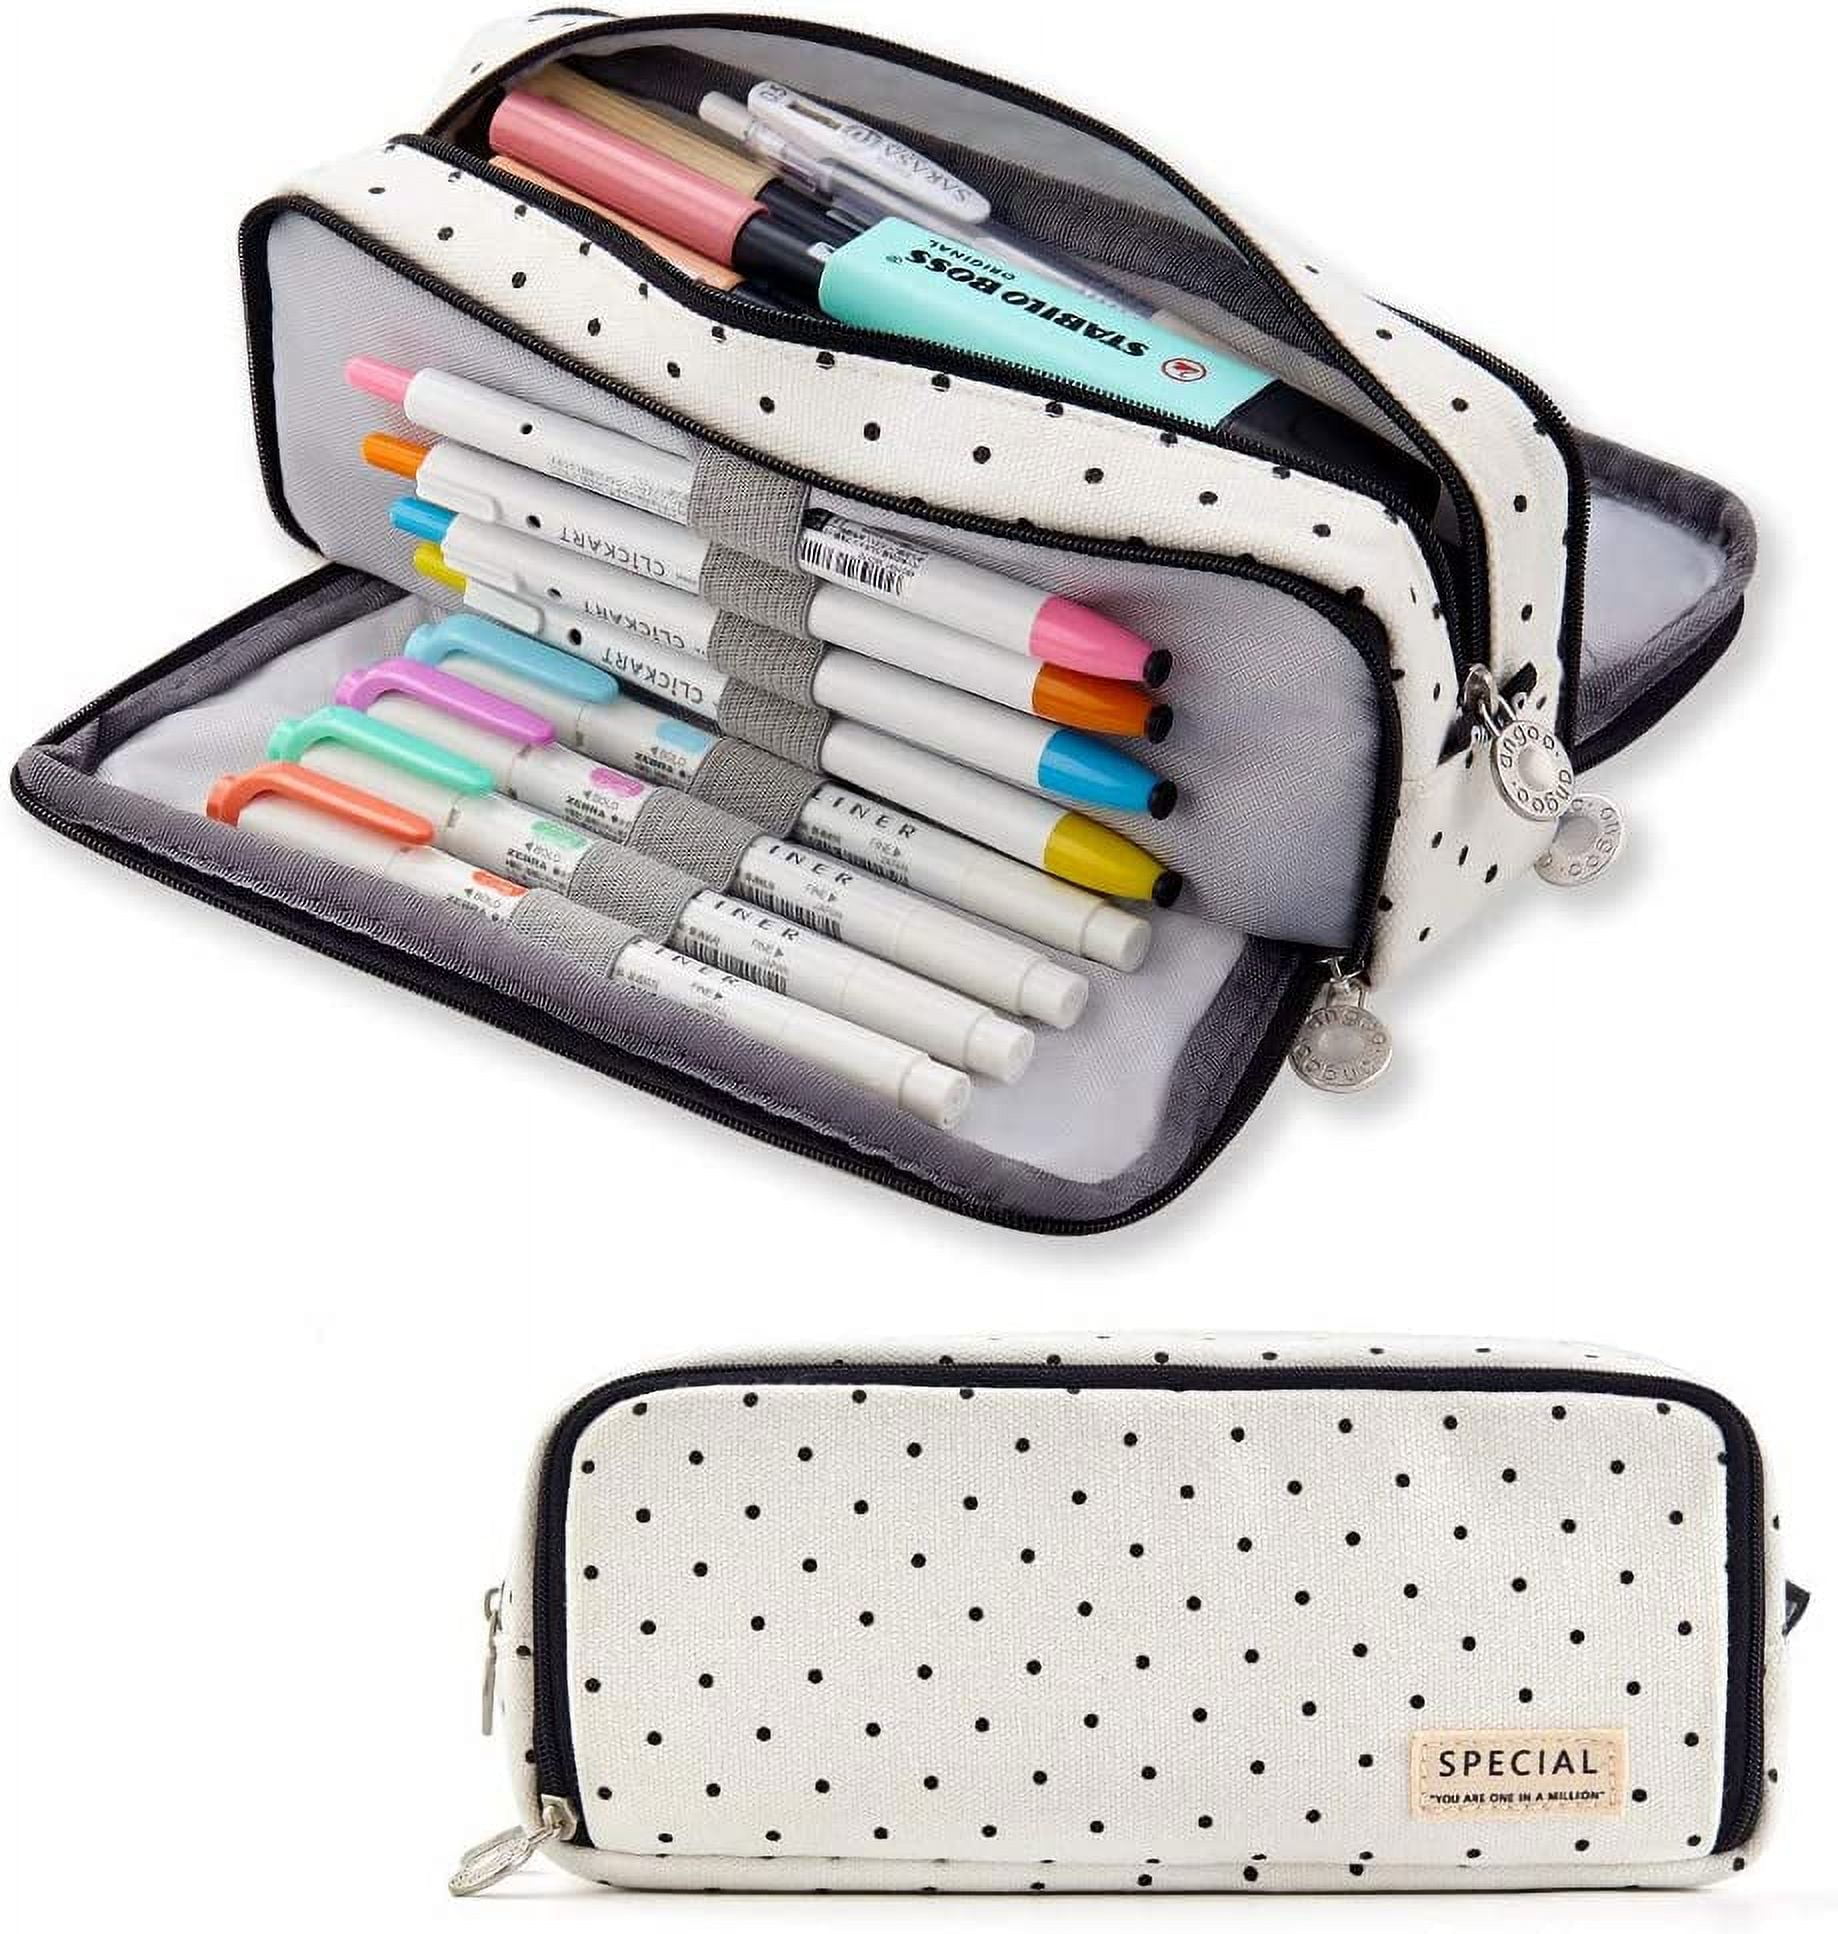 Truly Big Capacity Pencil Case 3 Compartments Large Pencil Pouch